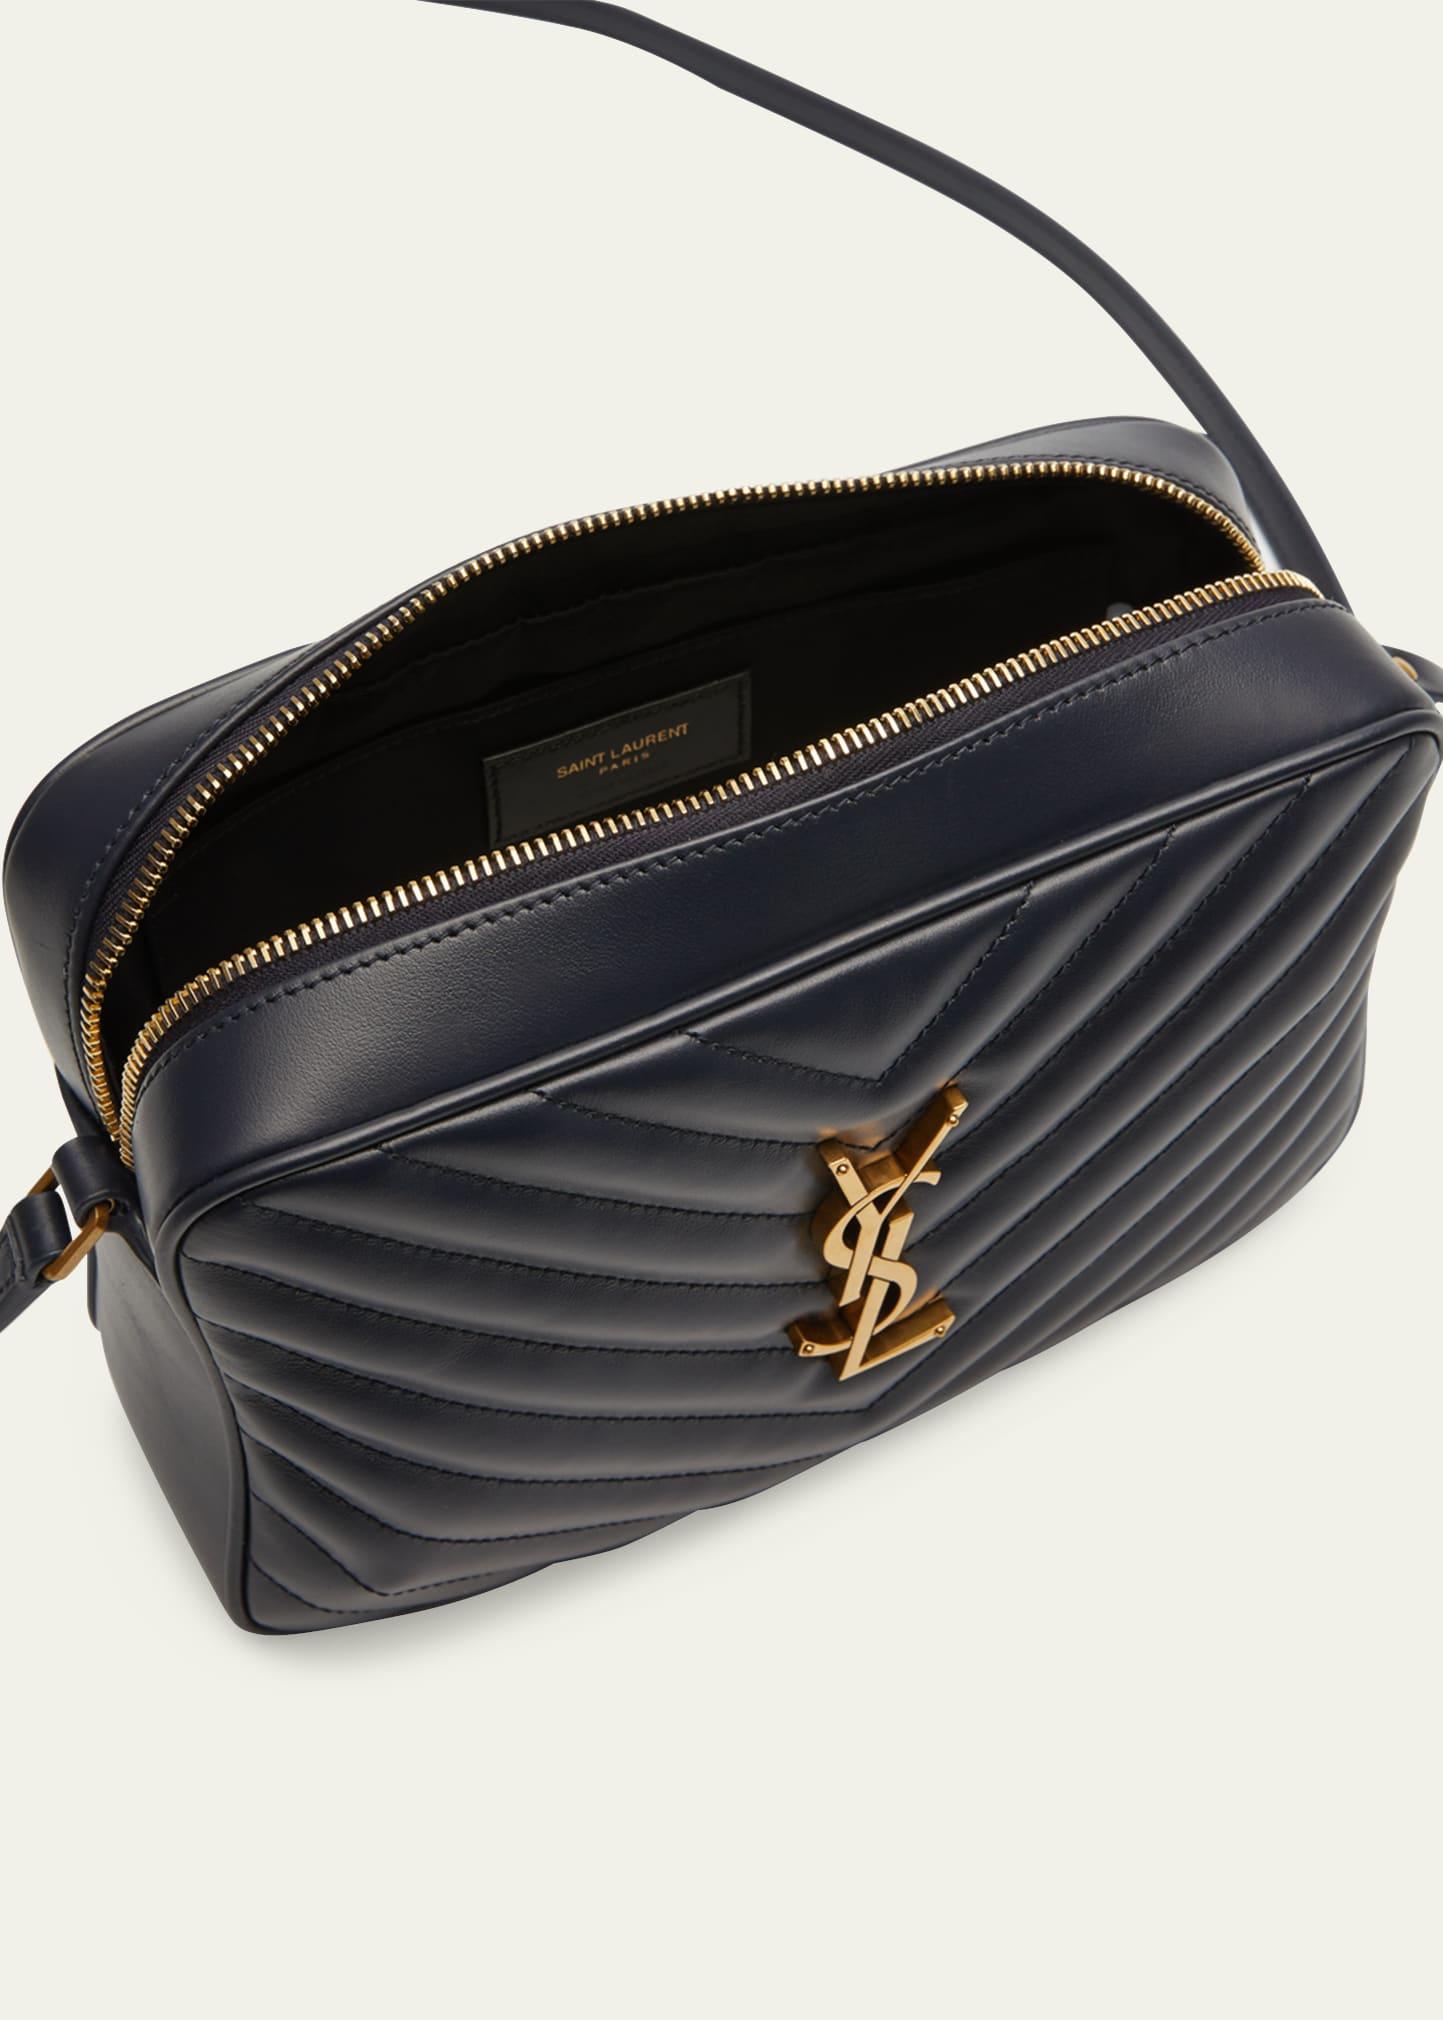 The ever popular YSL Lou Camera Bag now has the perfect back pocket!